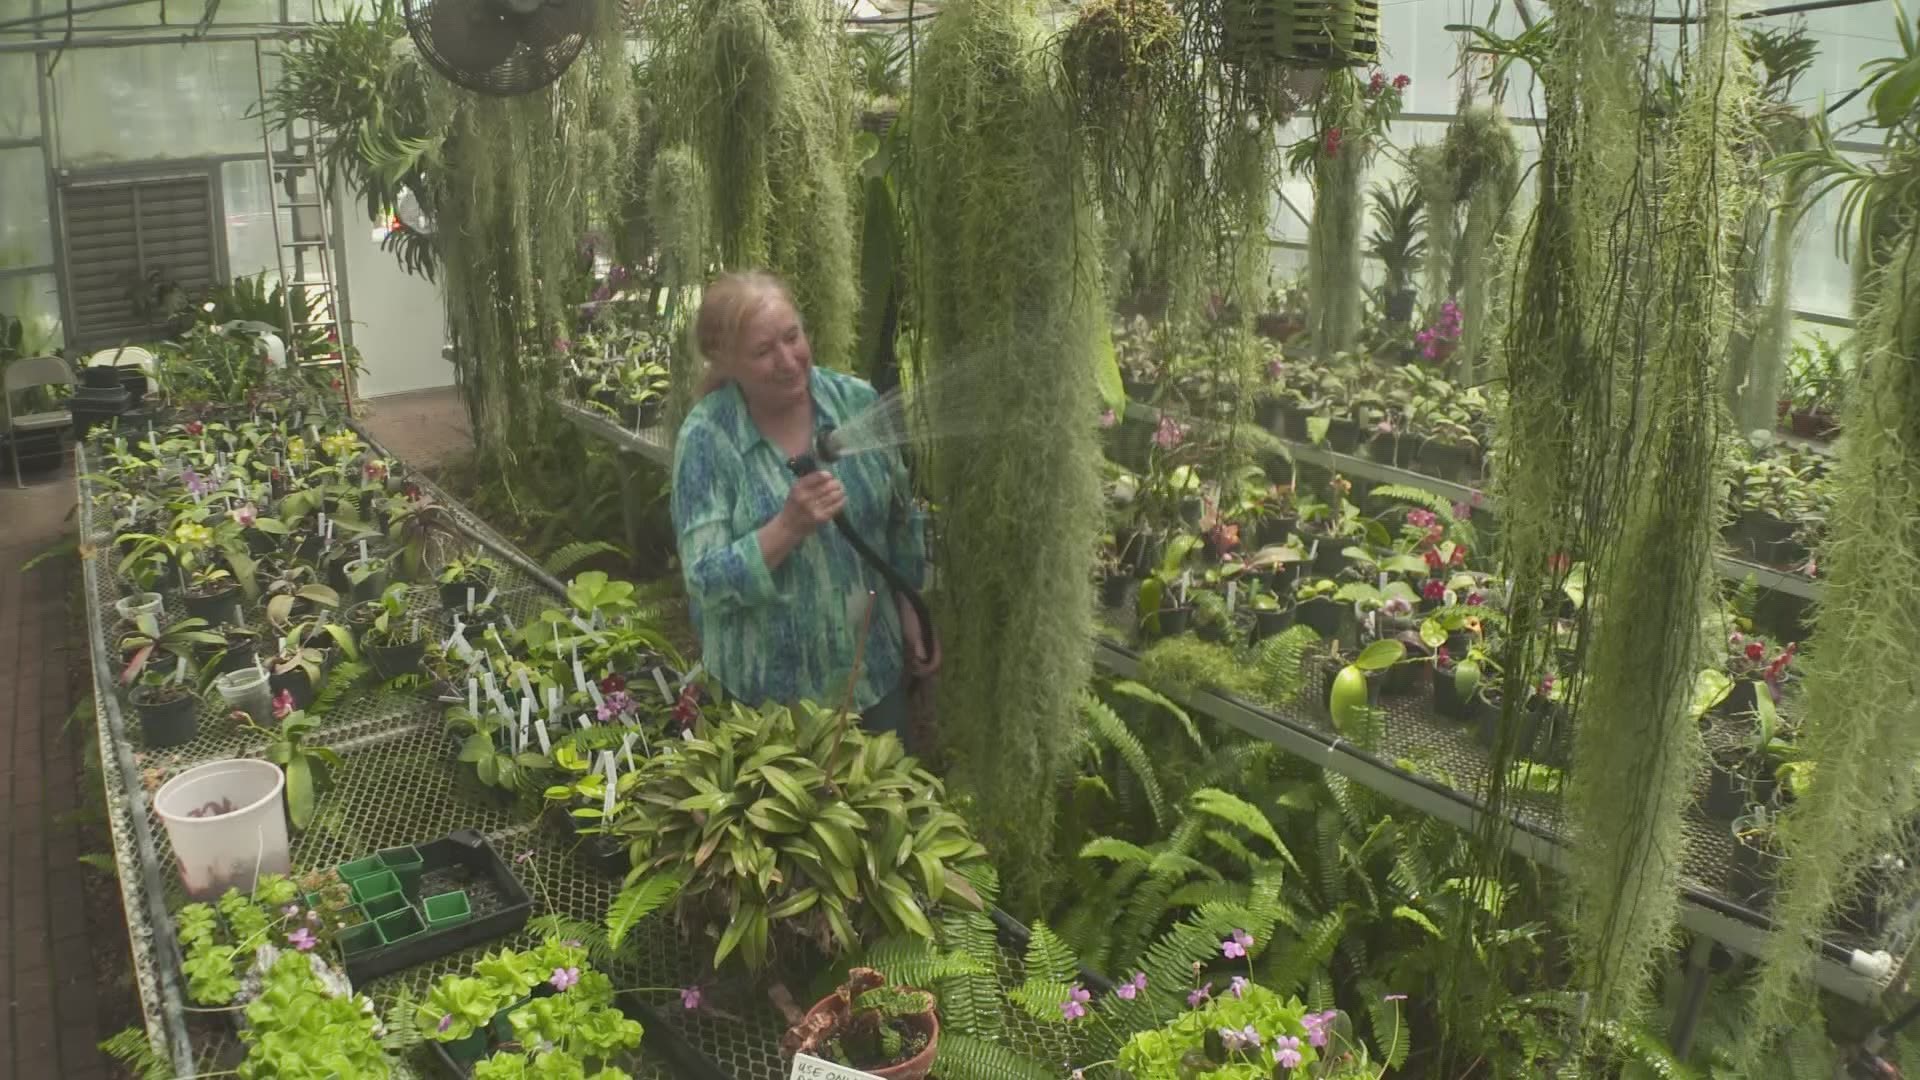 Dotty collects rainwater in two 2,500 gallon tanks behind her greenhouse. The latest rain totals mean she can water her orchids without tapping into city water.